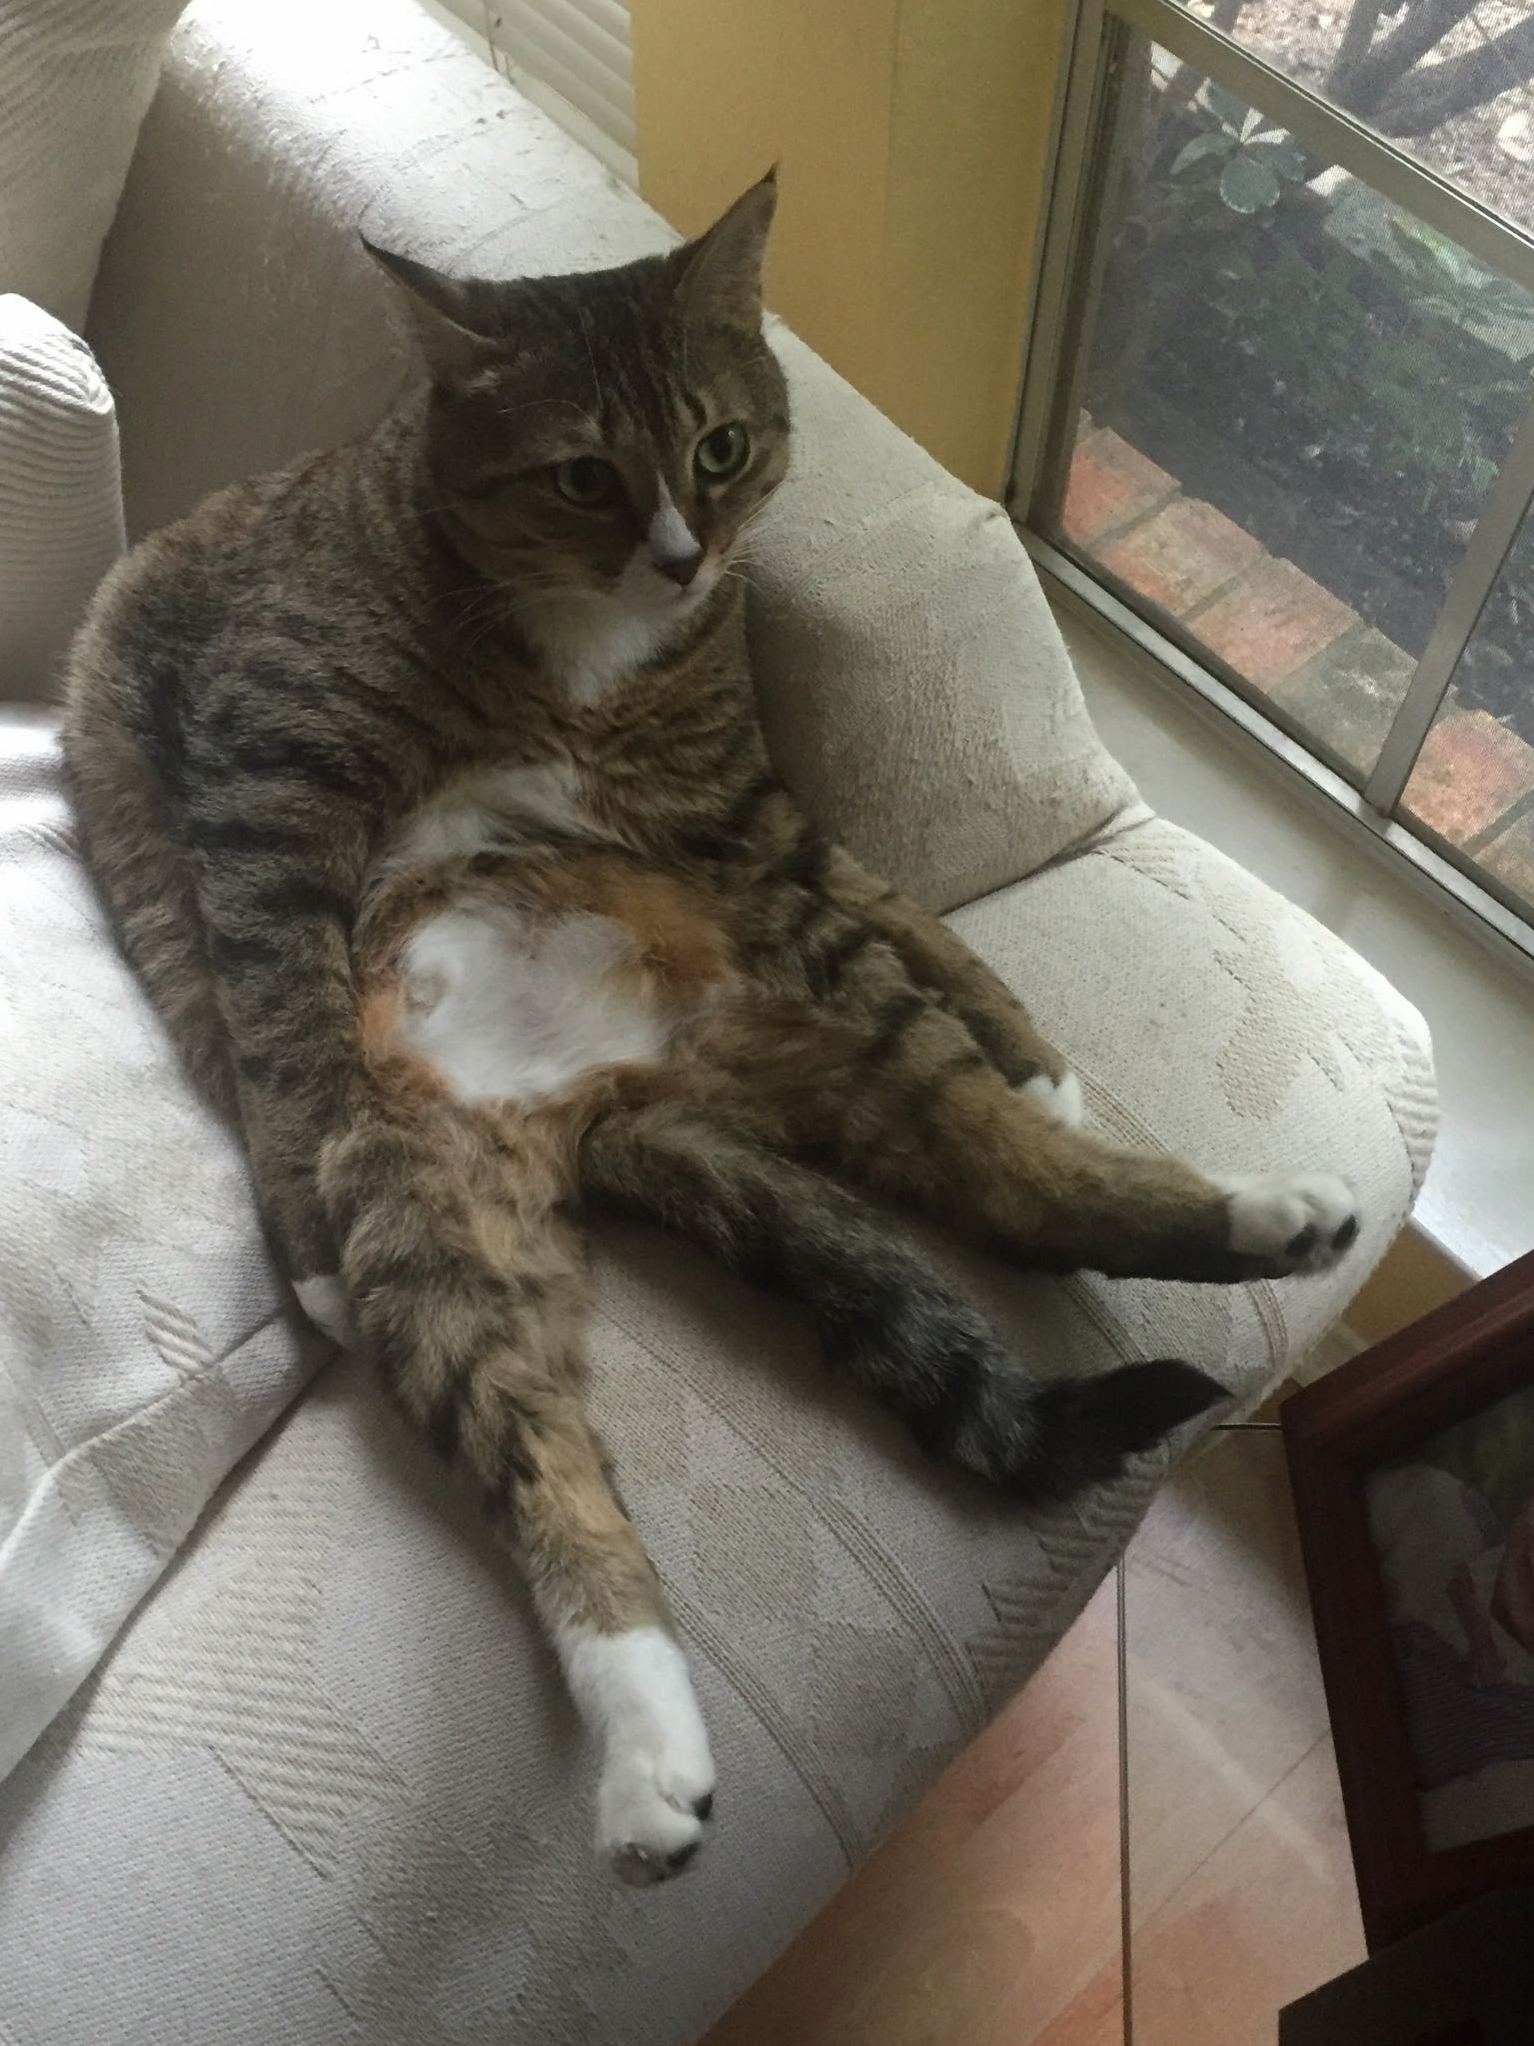 This is how my cat sits